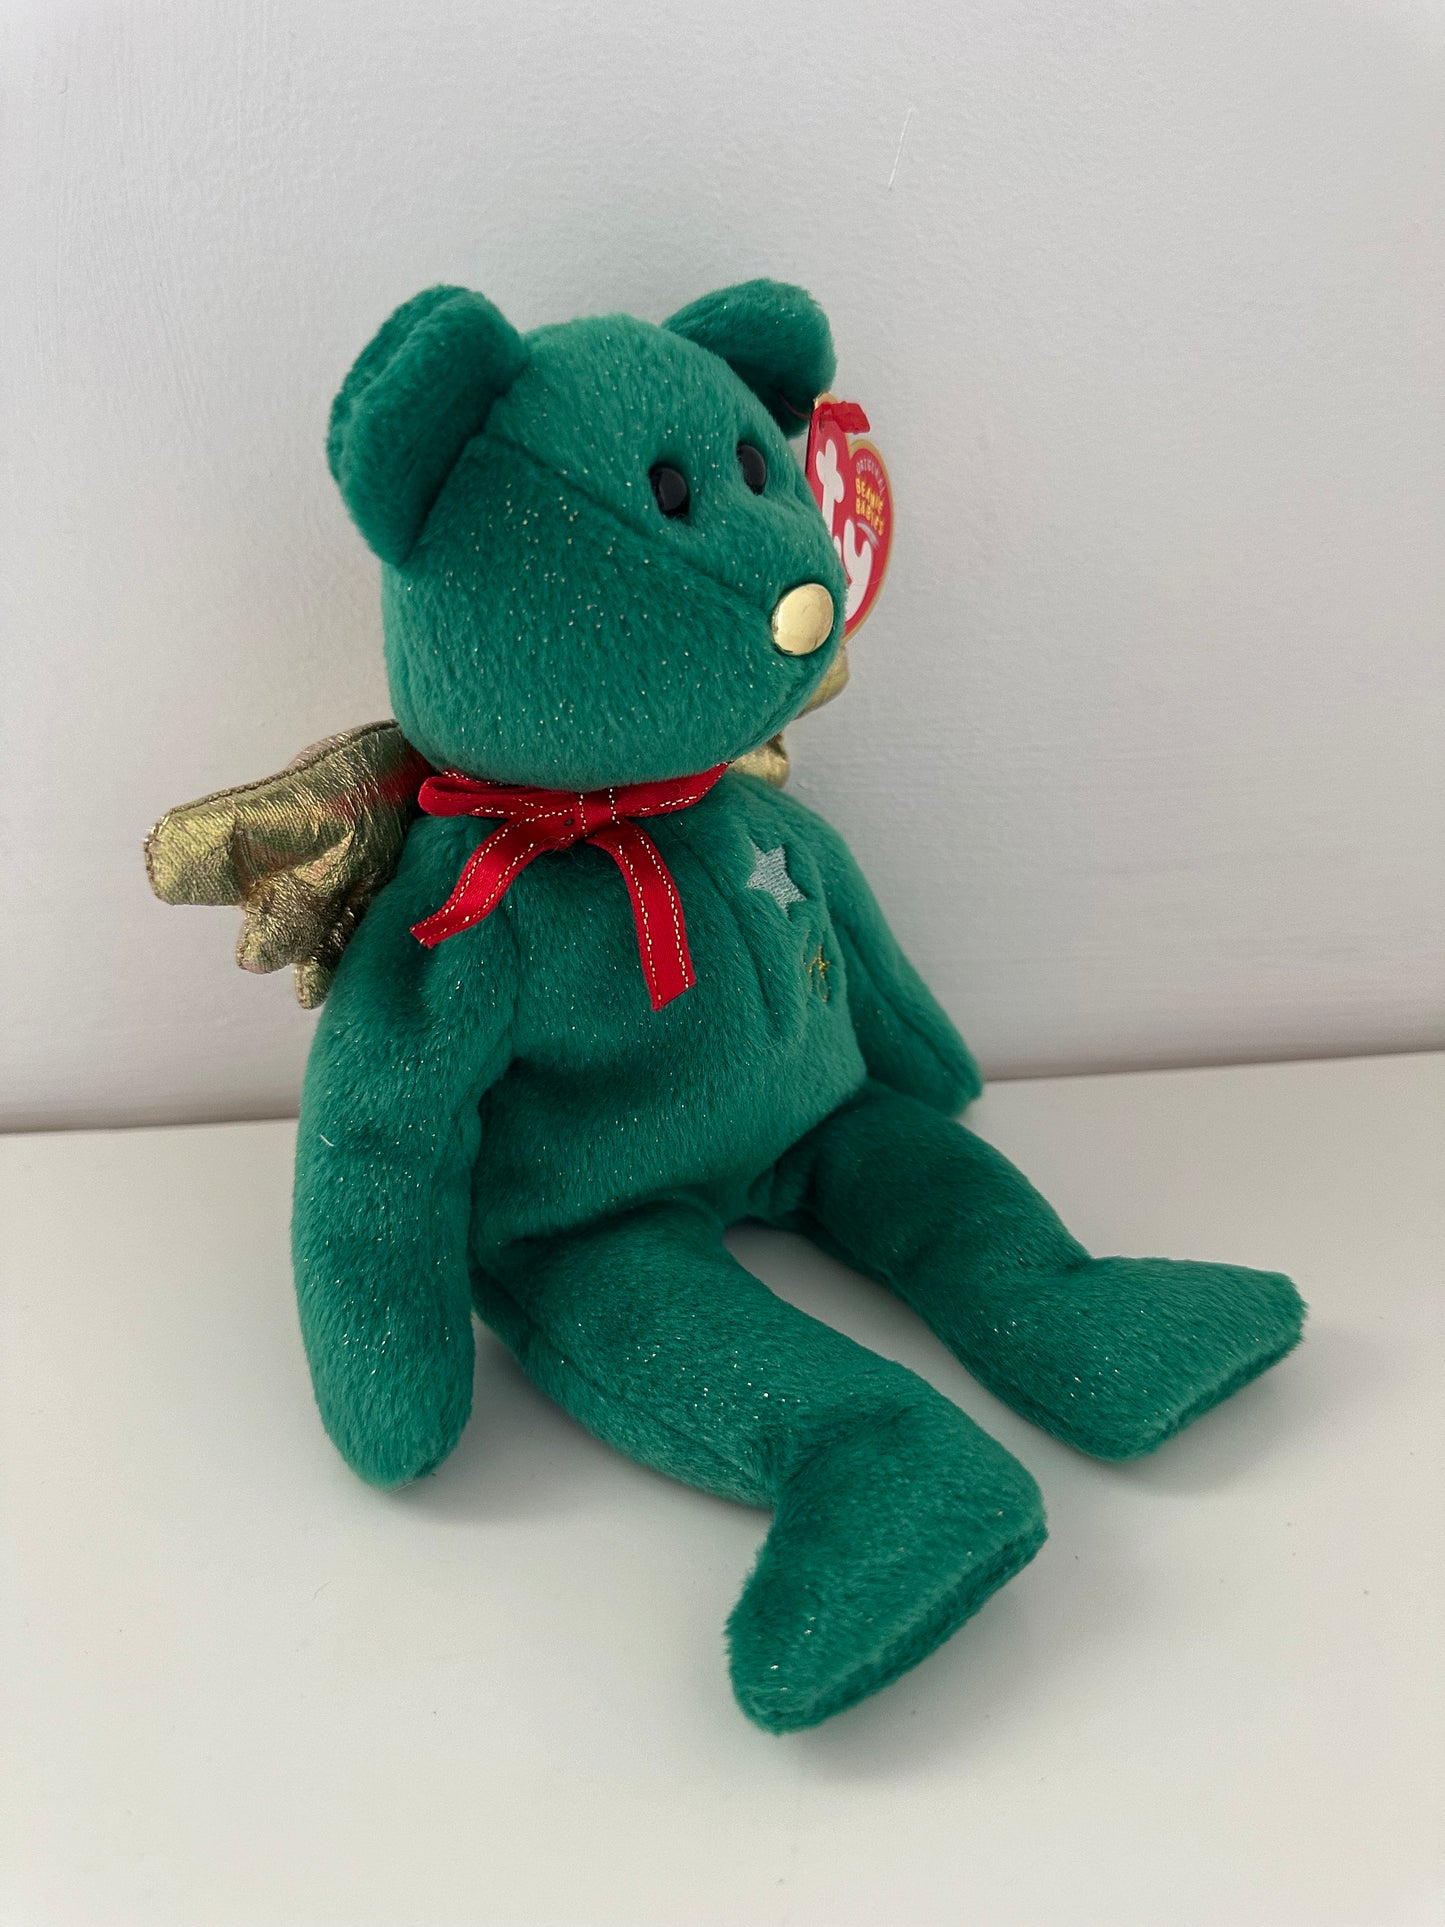 Ty Beanie Baby “Gift” the Angel Bear with Wings - Green Version Joy - Hallmark Gold Crown Exclusive (8.5 inch)